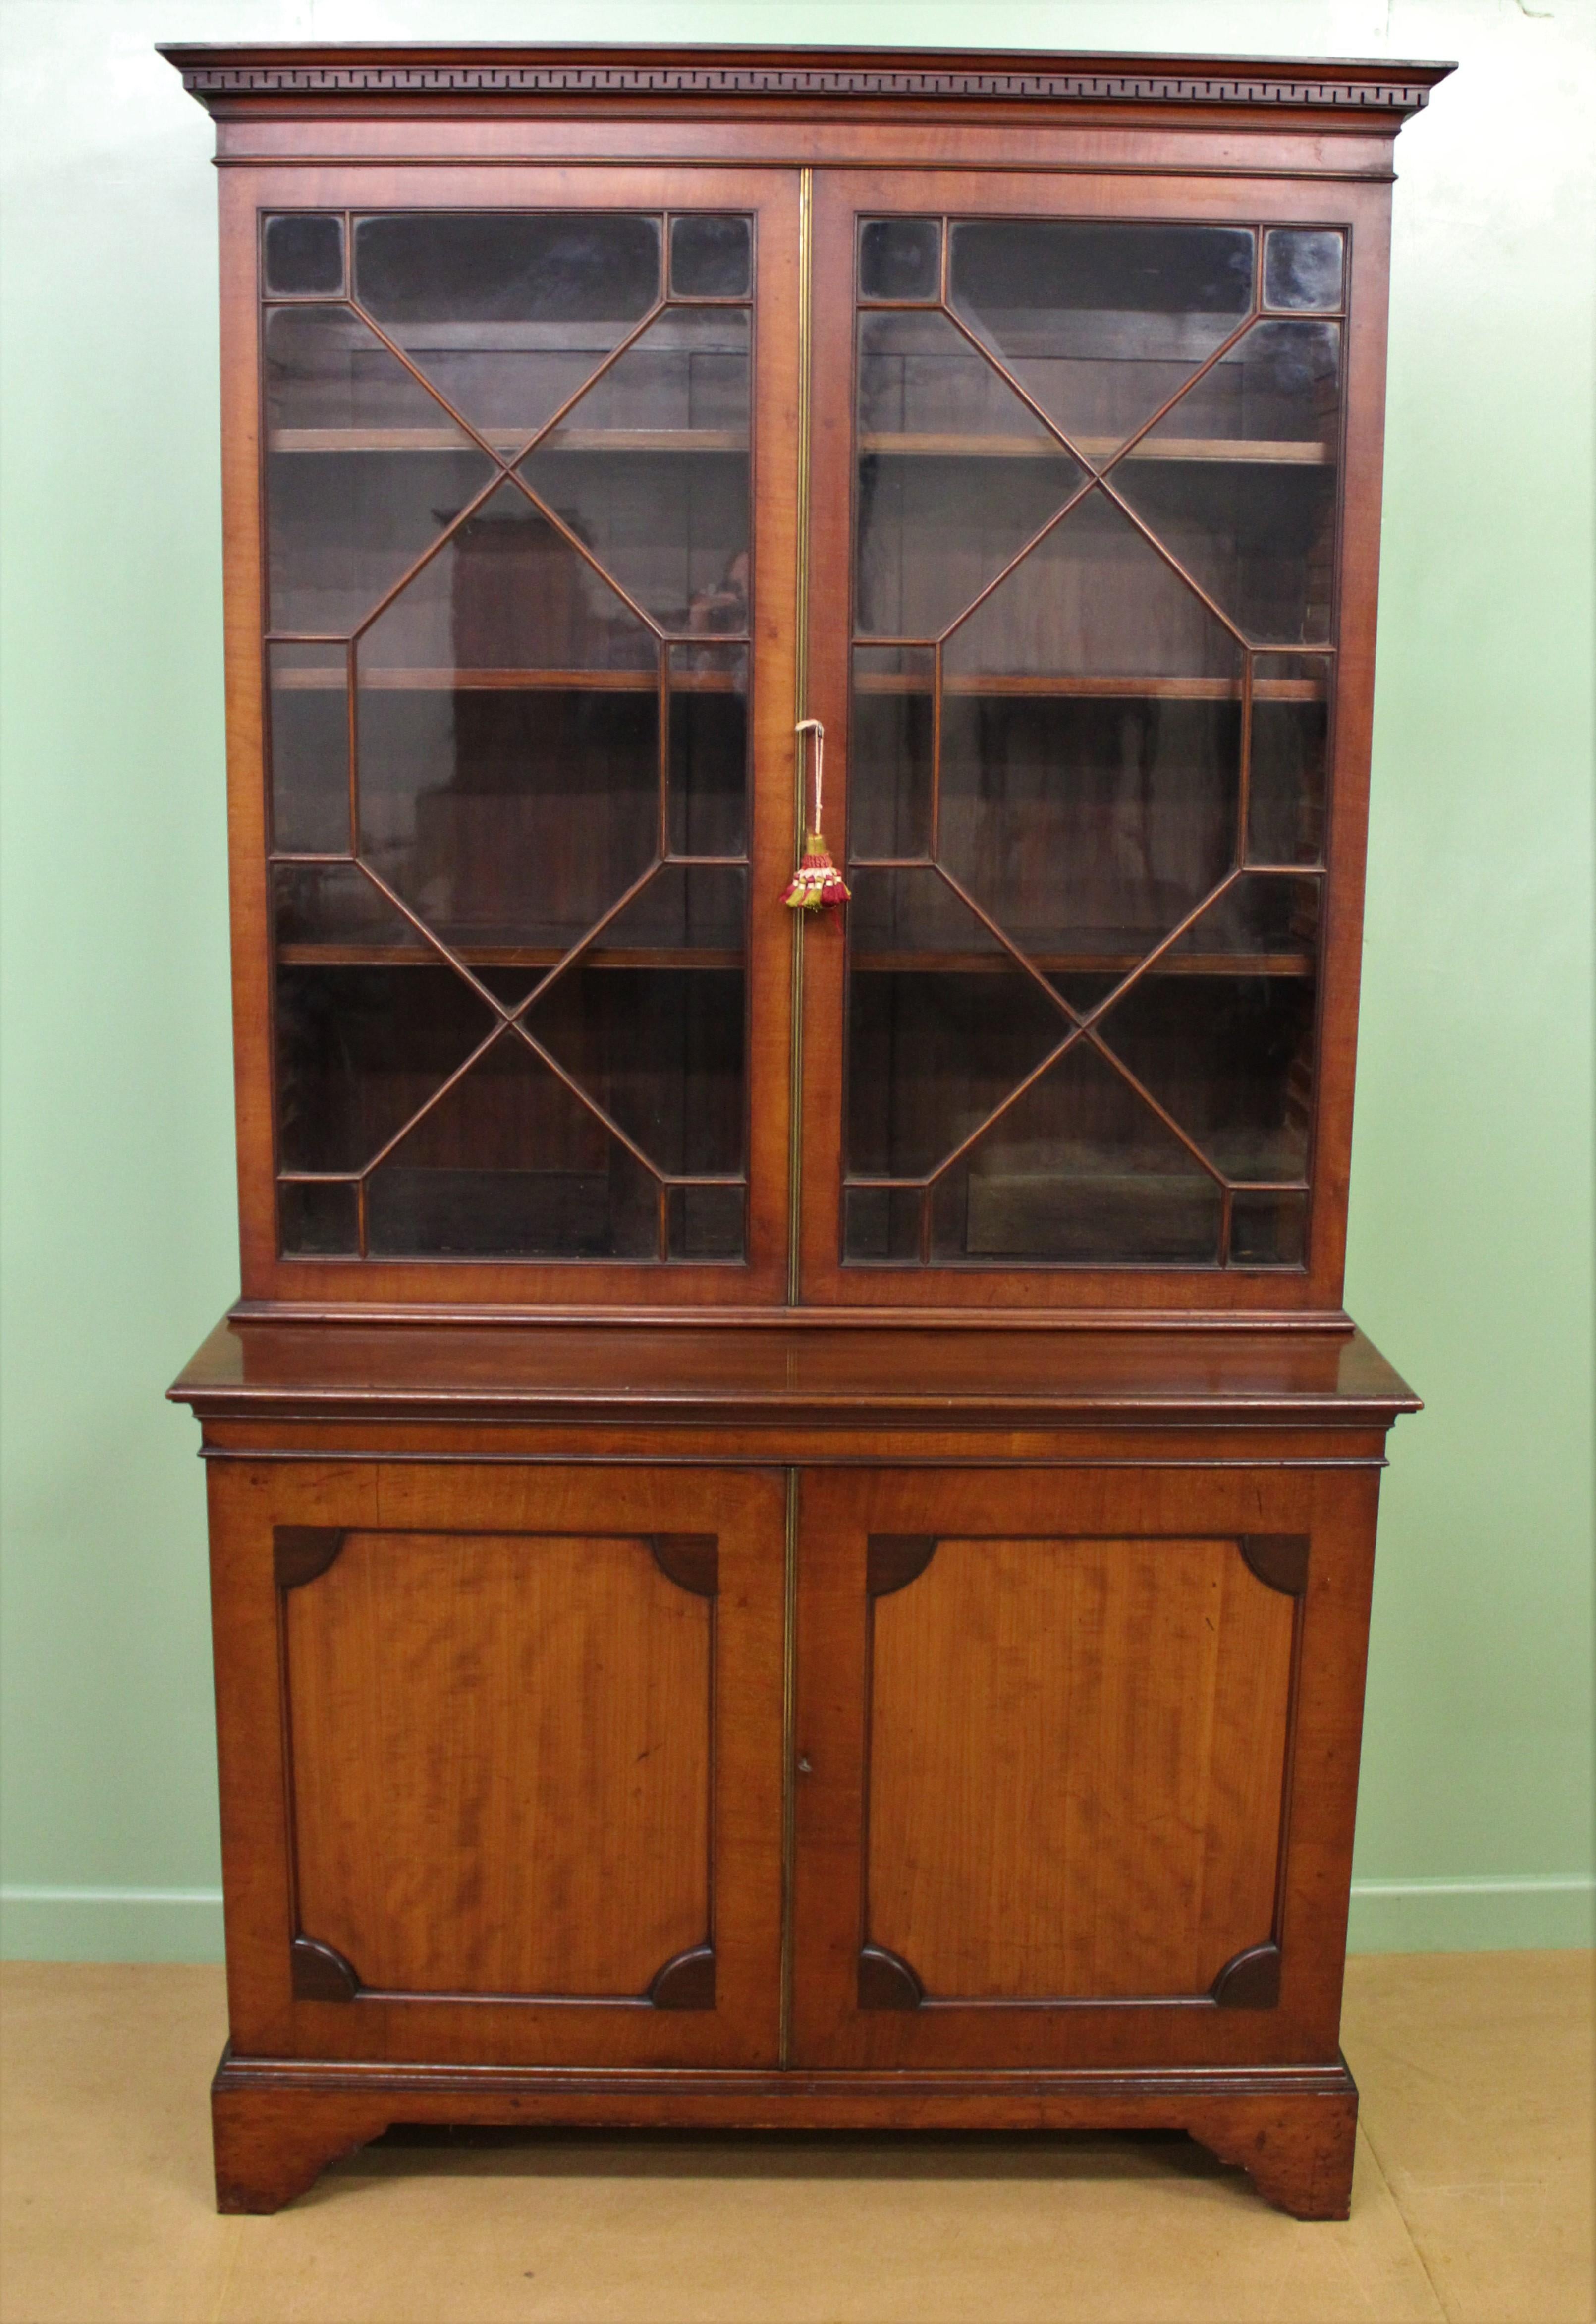 A very good glazed mahogany two door bookcase. Very well constructed in solid mahogany with attractive mahogany veneers. The top section with a dentil molding cornice sitting over a pair of glazed doors. The doors open to access an interior with